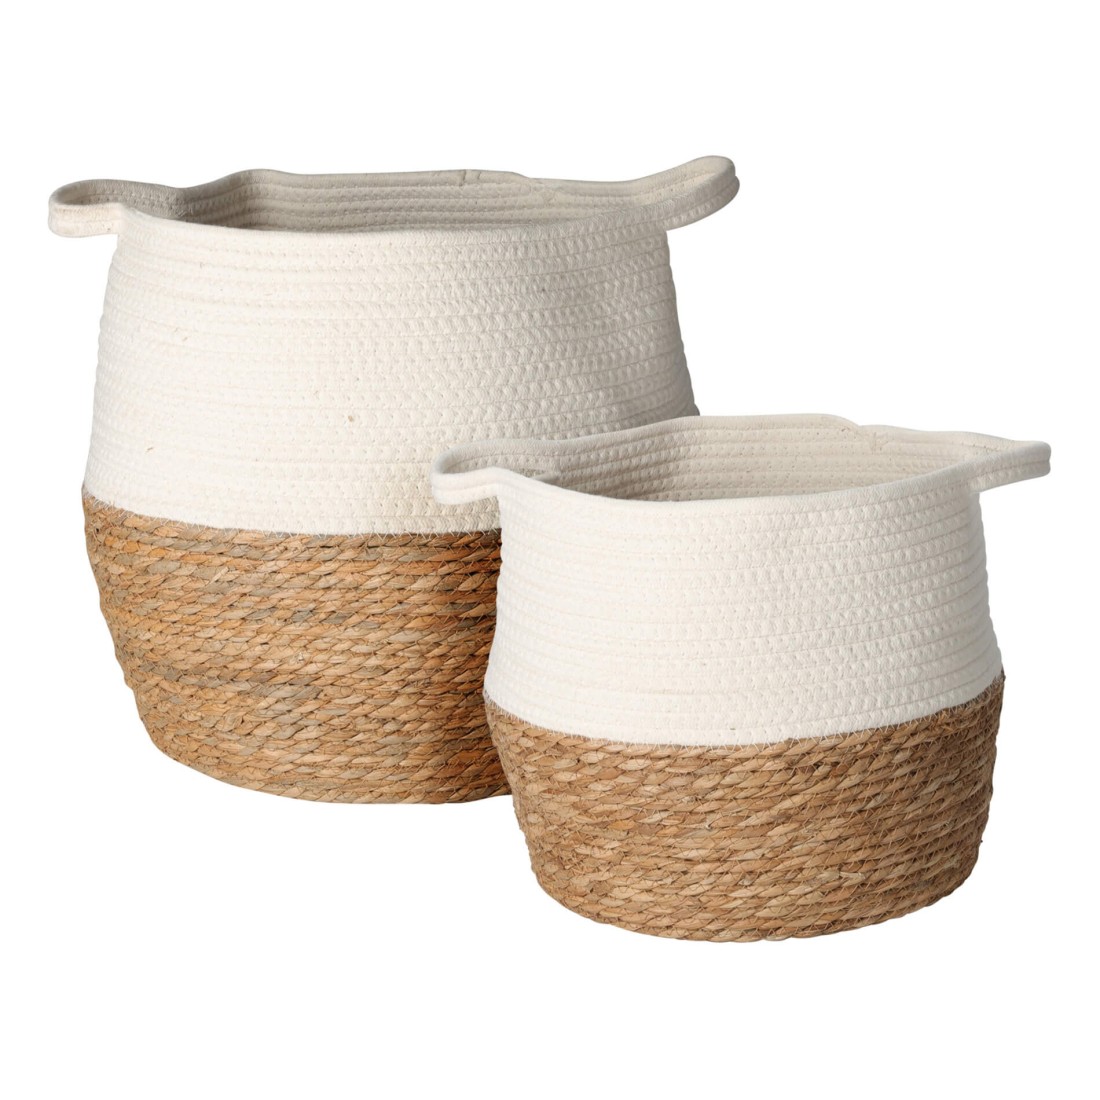 Cycas - Set of 2 storage baskets in seagrass and cotton